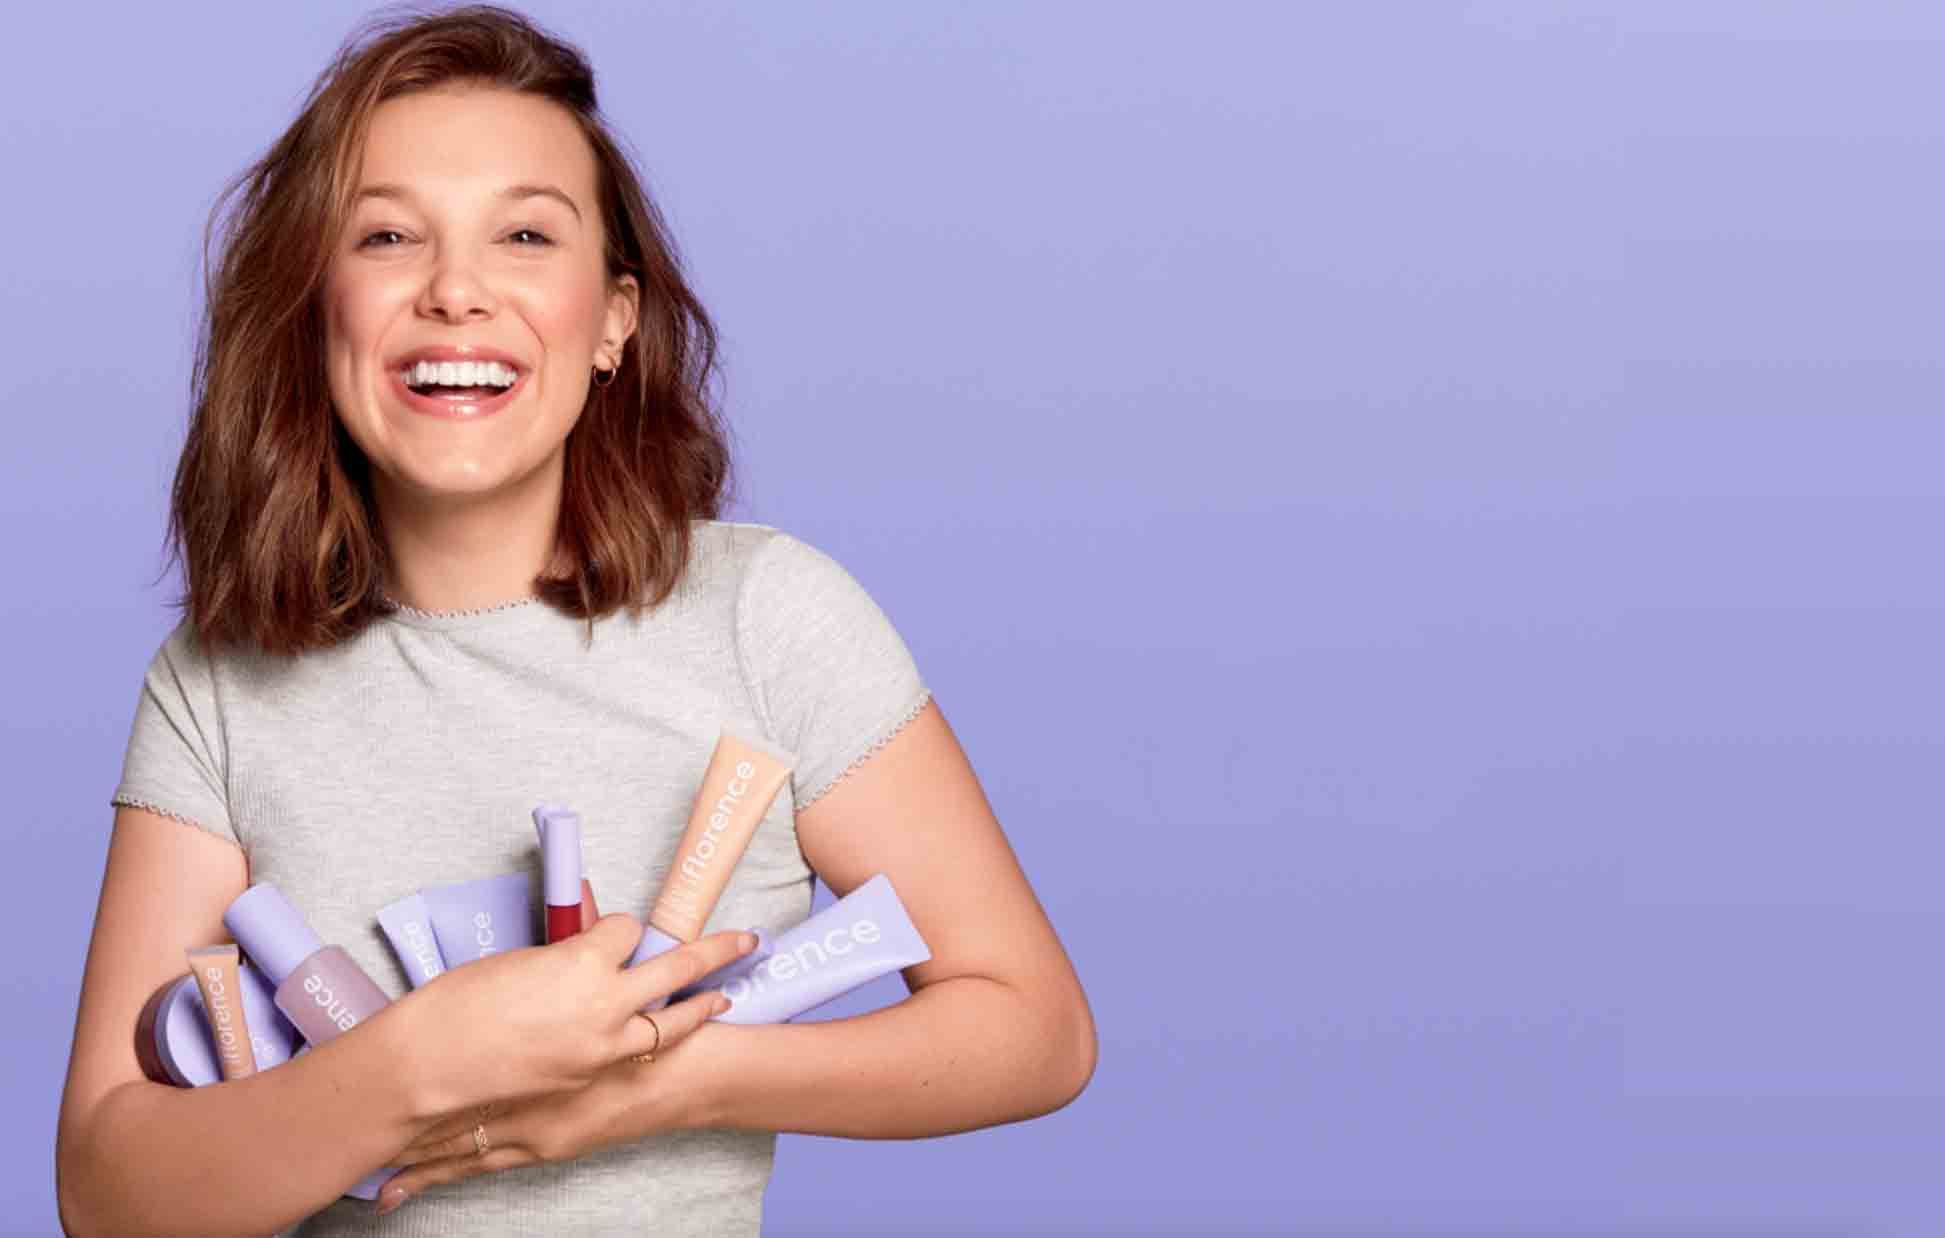 Millie Bobby Brown Launches Florence By Mills Makeup